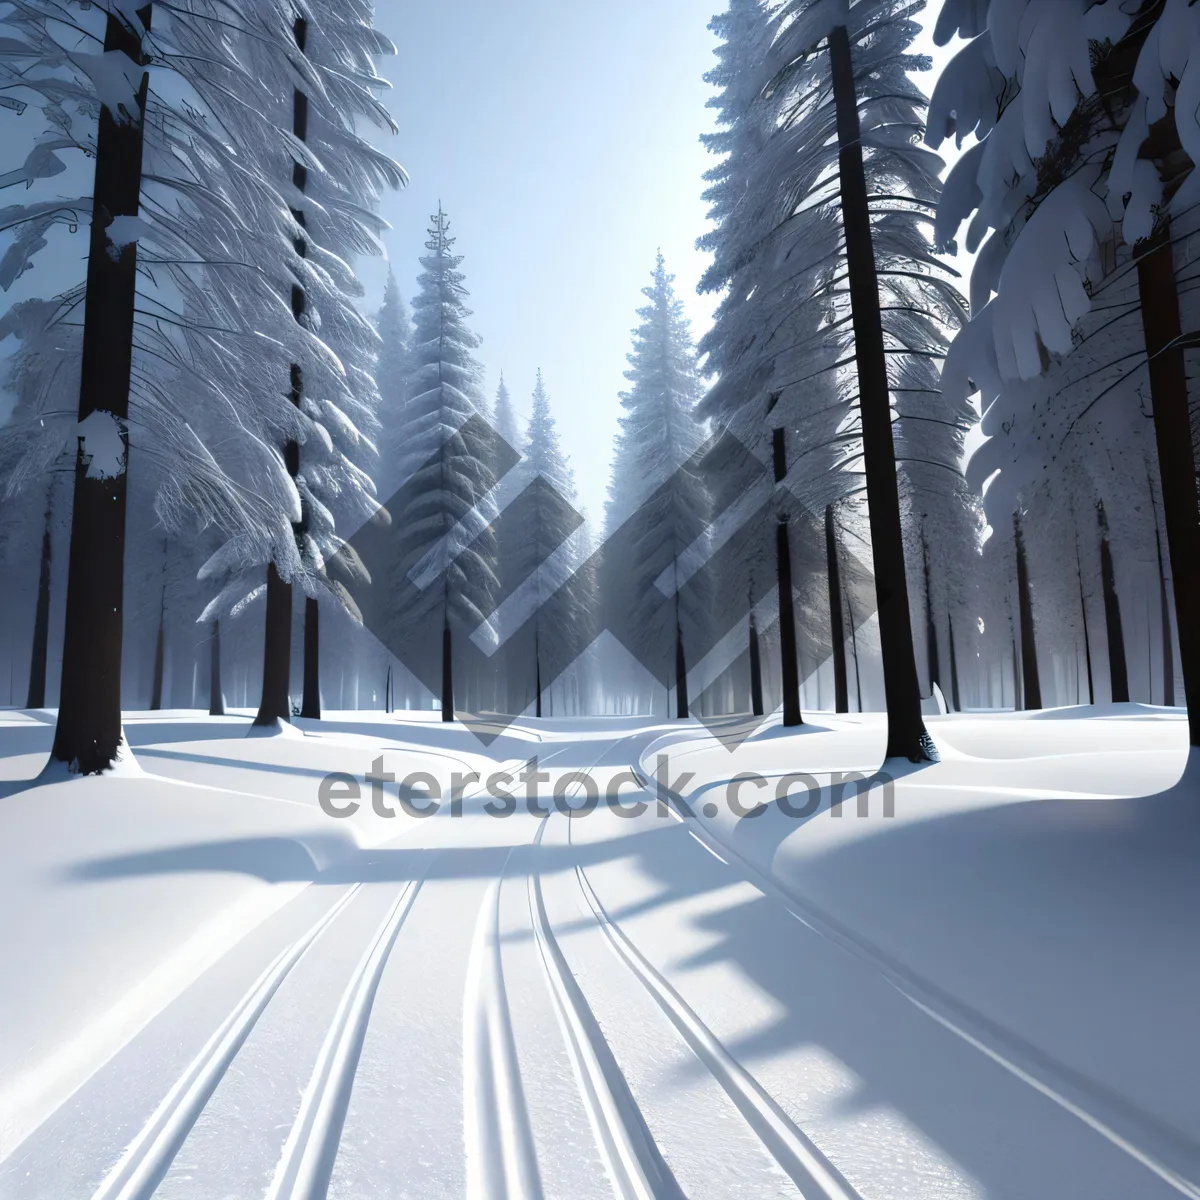 Picture of Winter Wonderland: Majestic Mountain Road through Snowy Forest